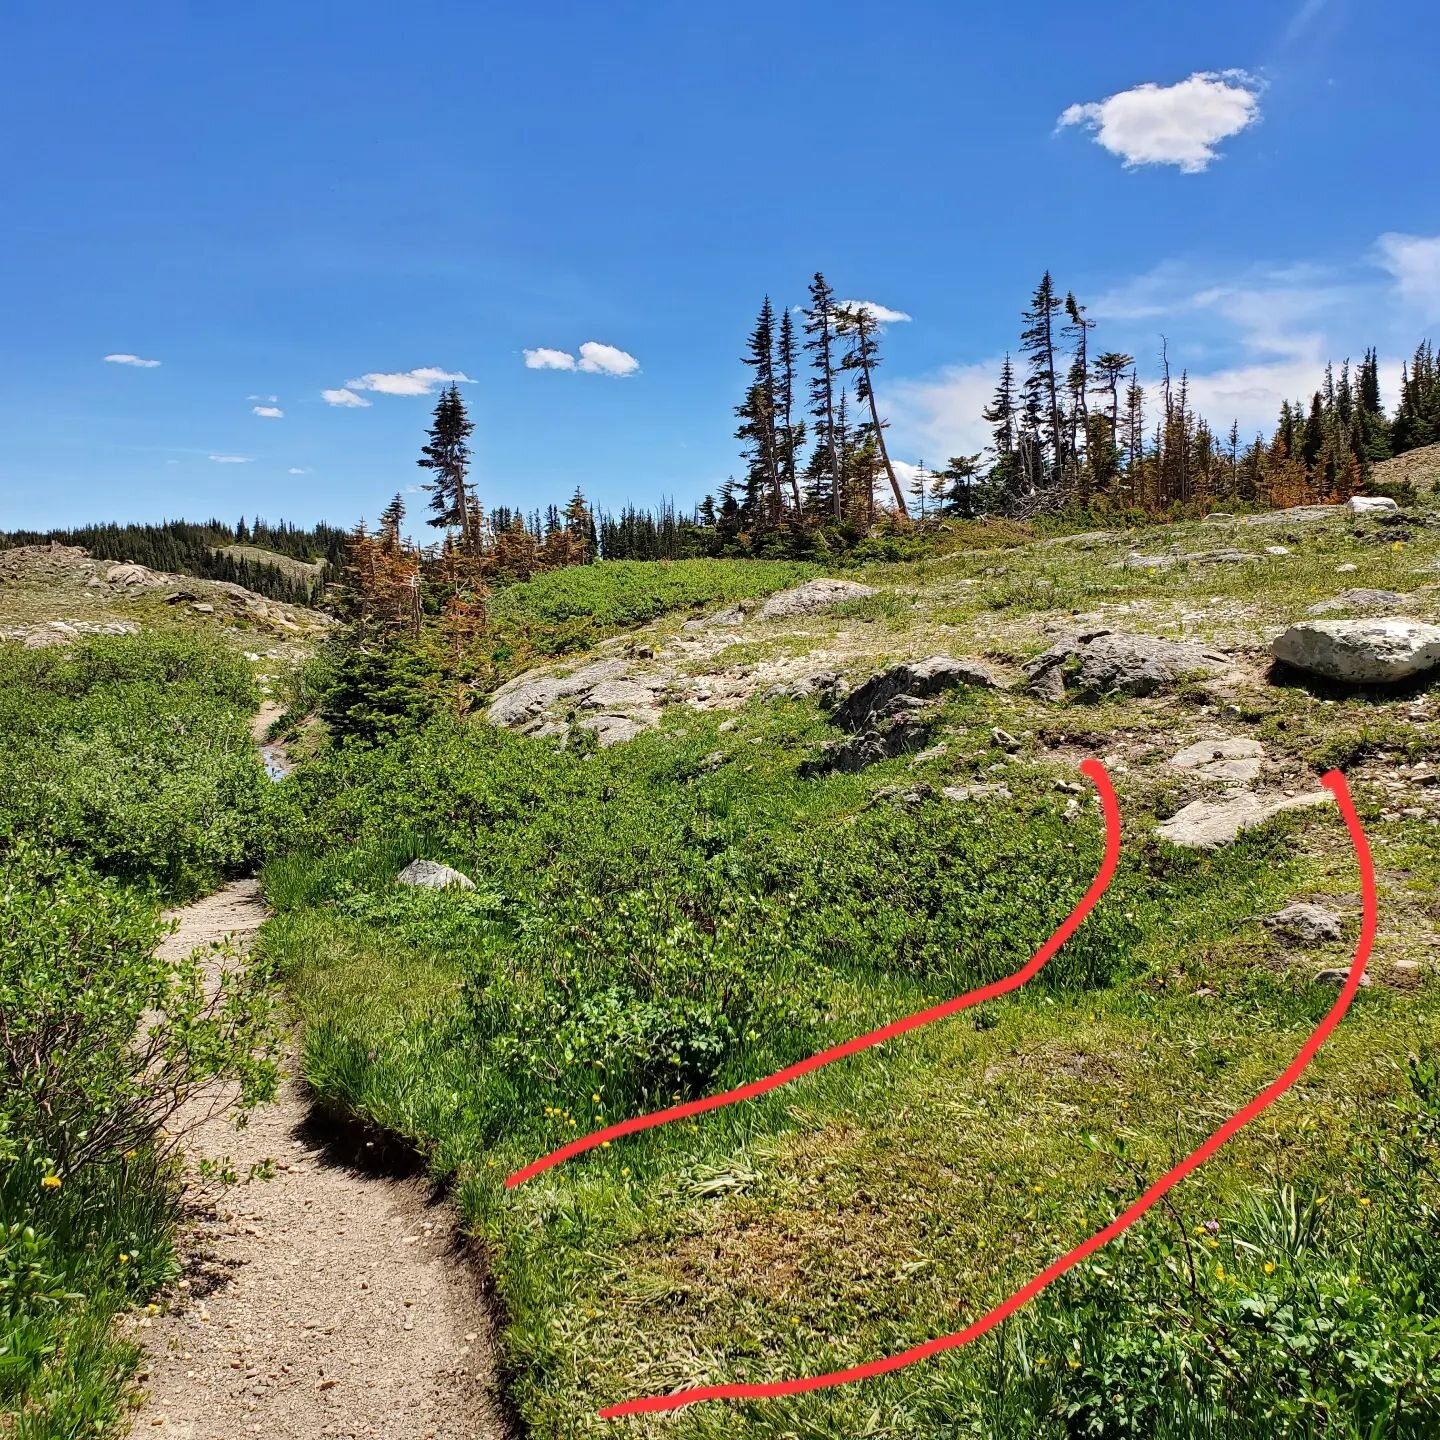 🛑 Stick to the trail, especially in sensitive areas like this alpine environment. The red lines in the photo mark where people are venturing off trail, and you can see where the vegetation has been damaged. This may be due to a once muddy trail peop